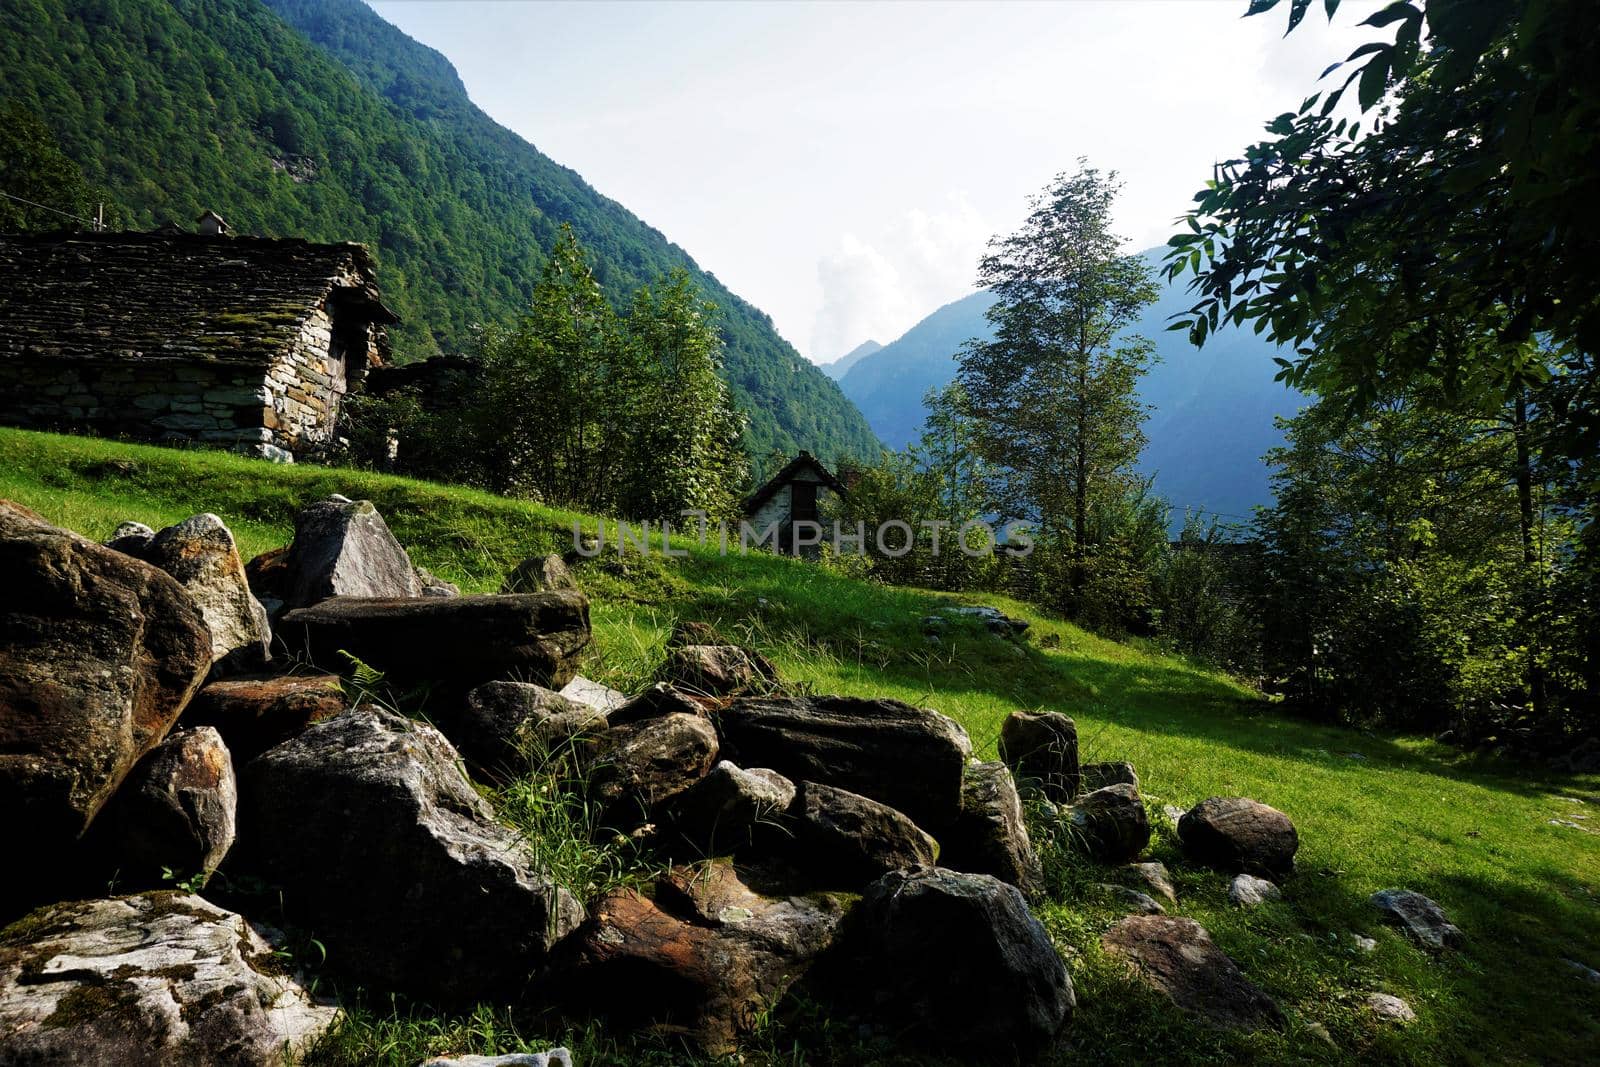 Traditional rustic houses spotted near Gerra, Verzasca Valley, Switzerland